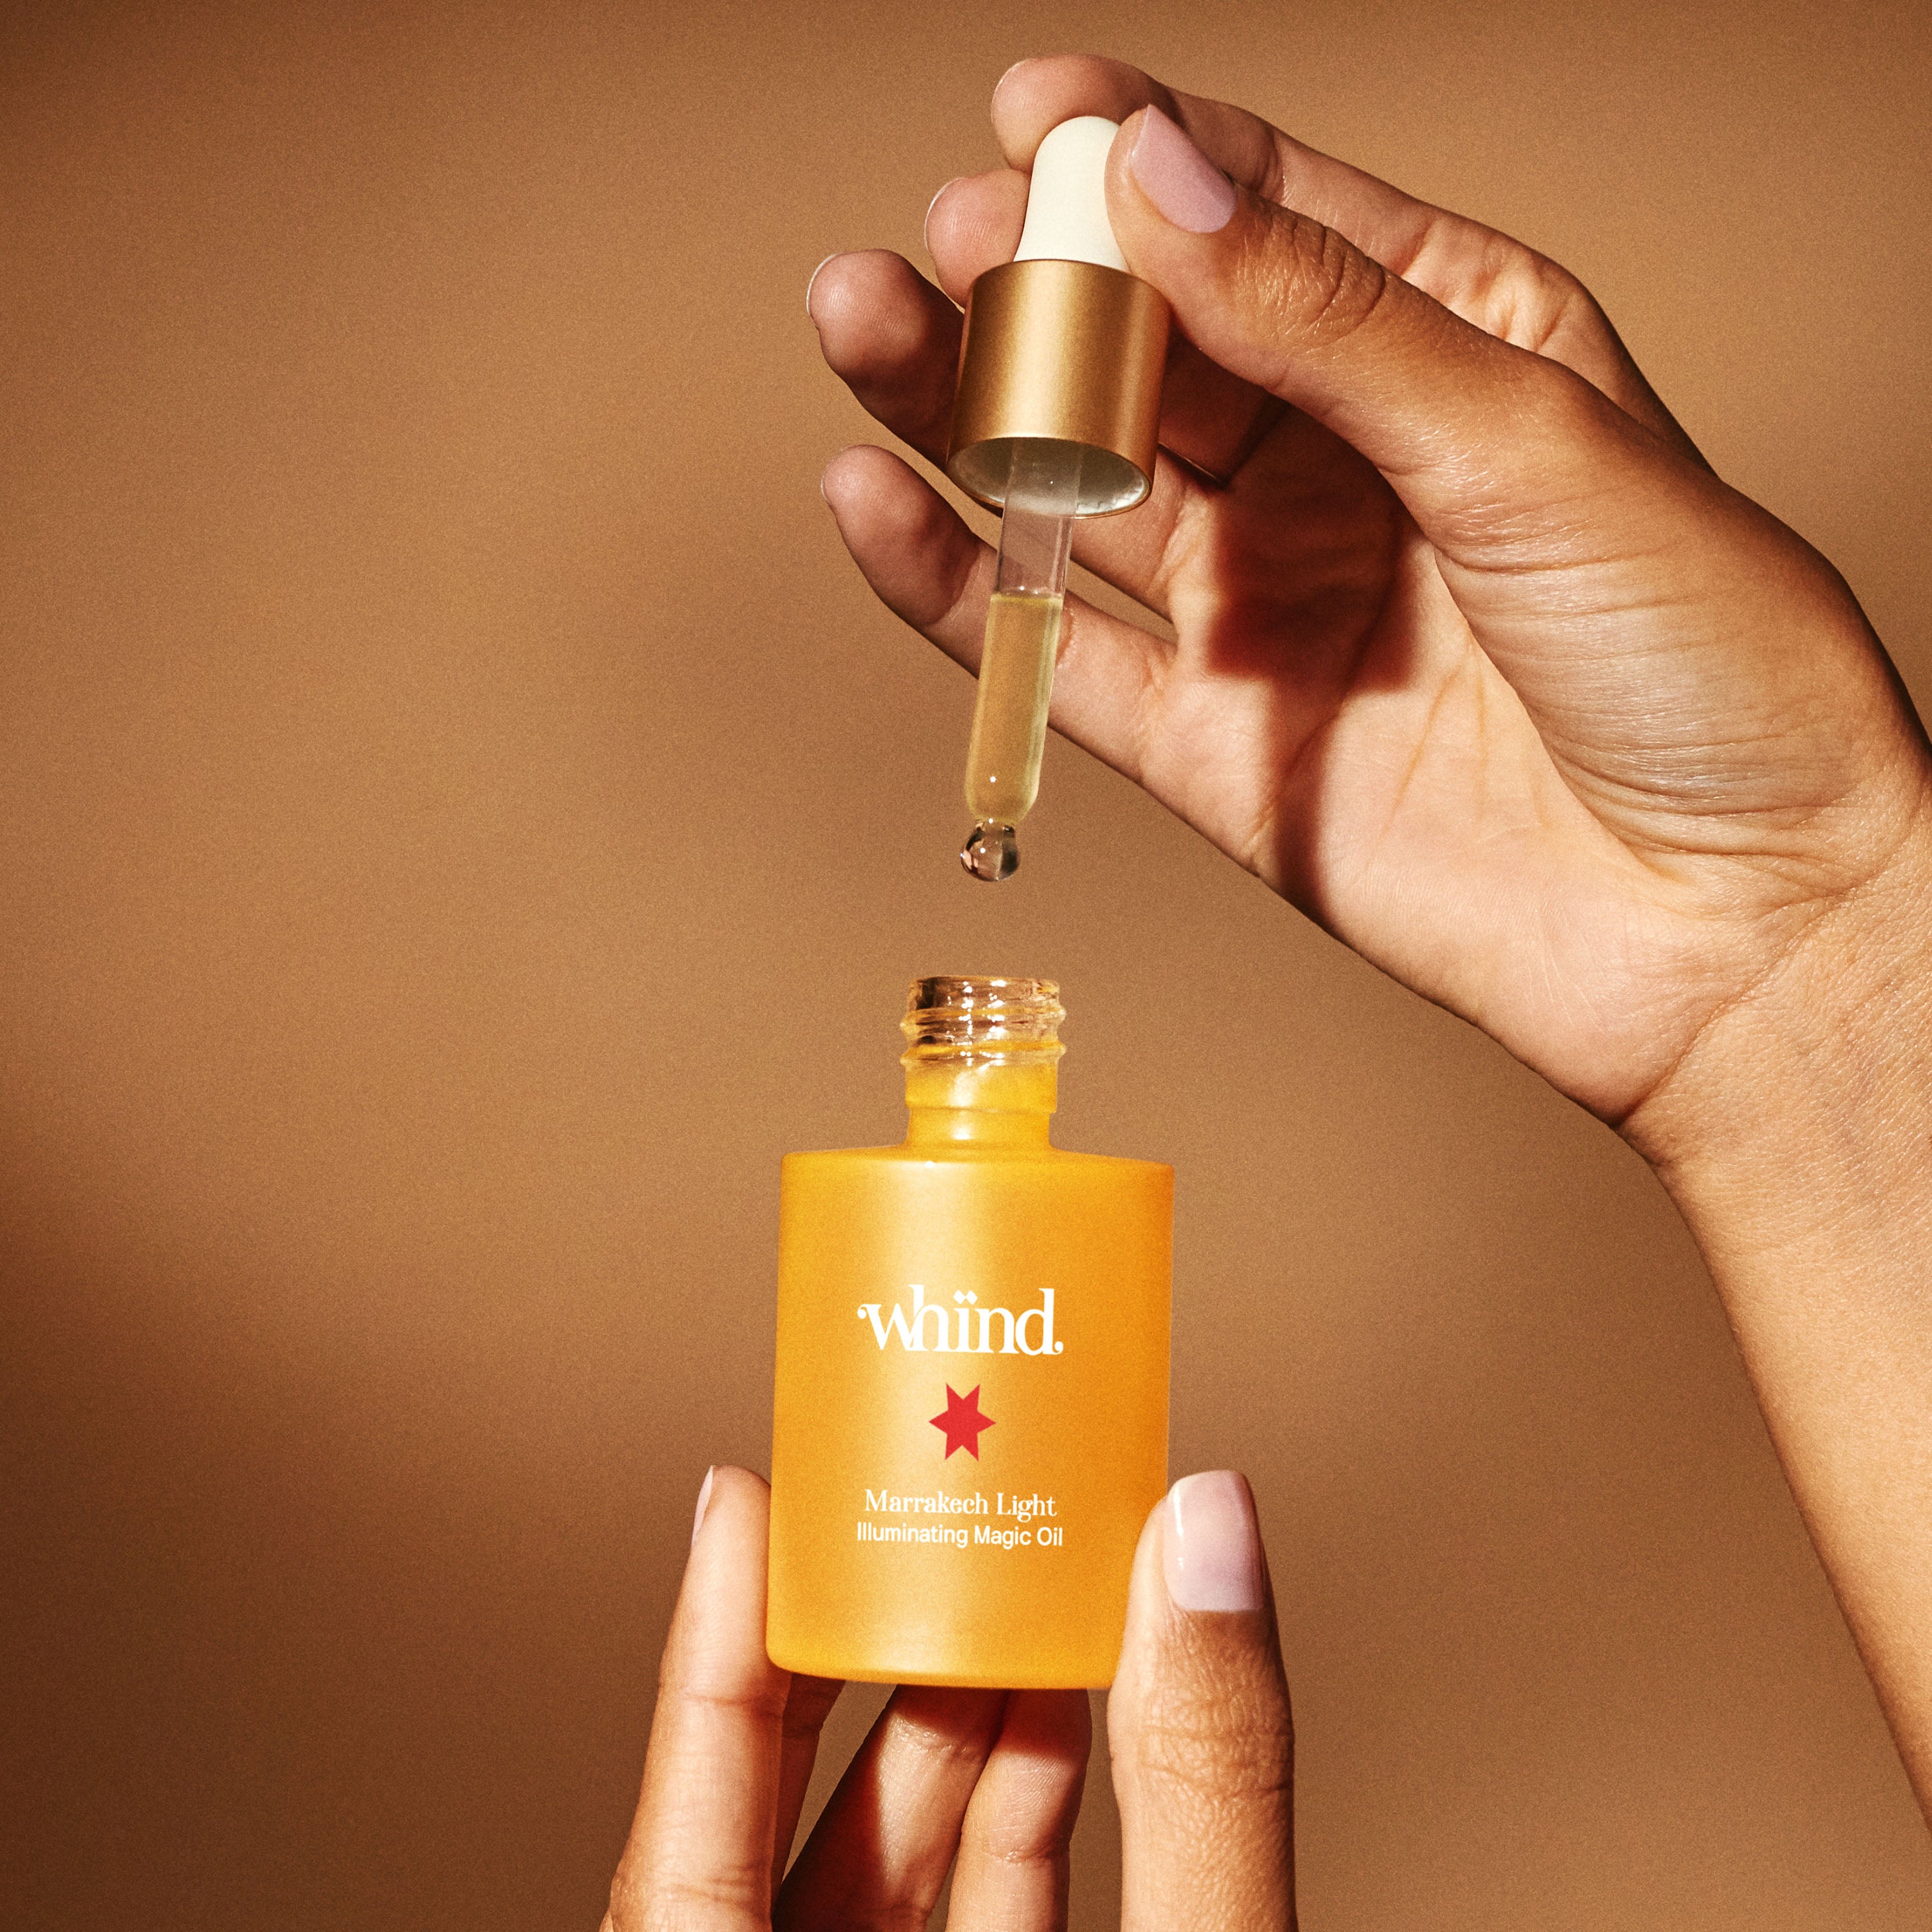 Marrakech Light - Illuminating Glow Oil | whind – whind-US